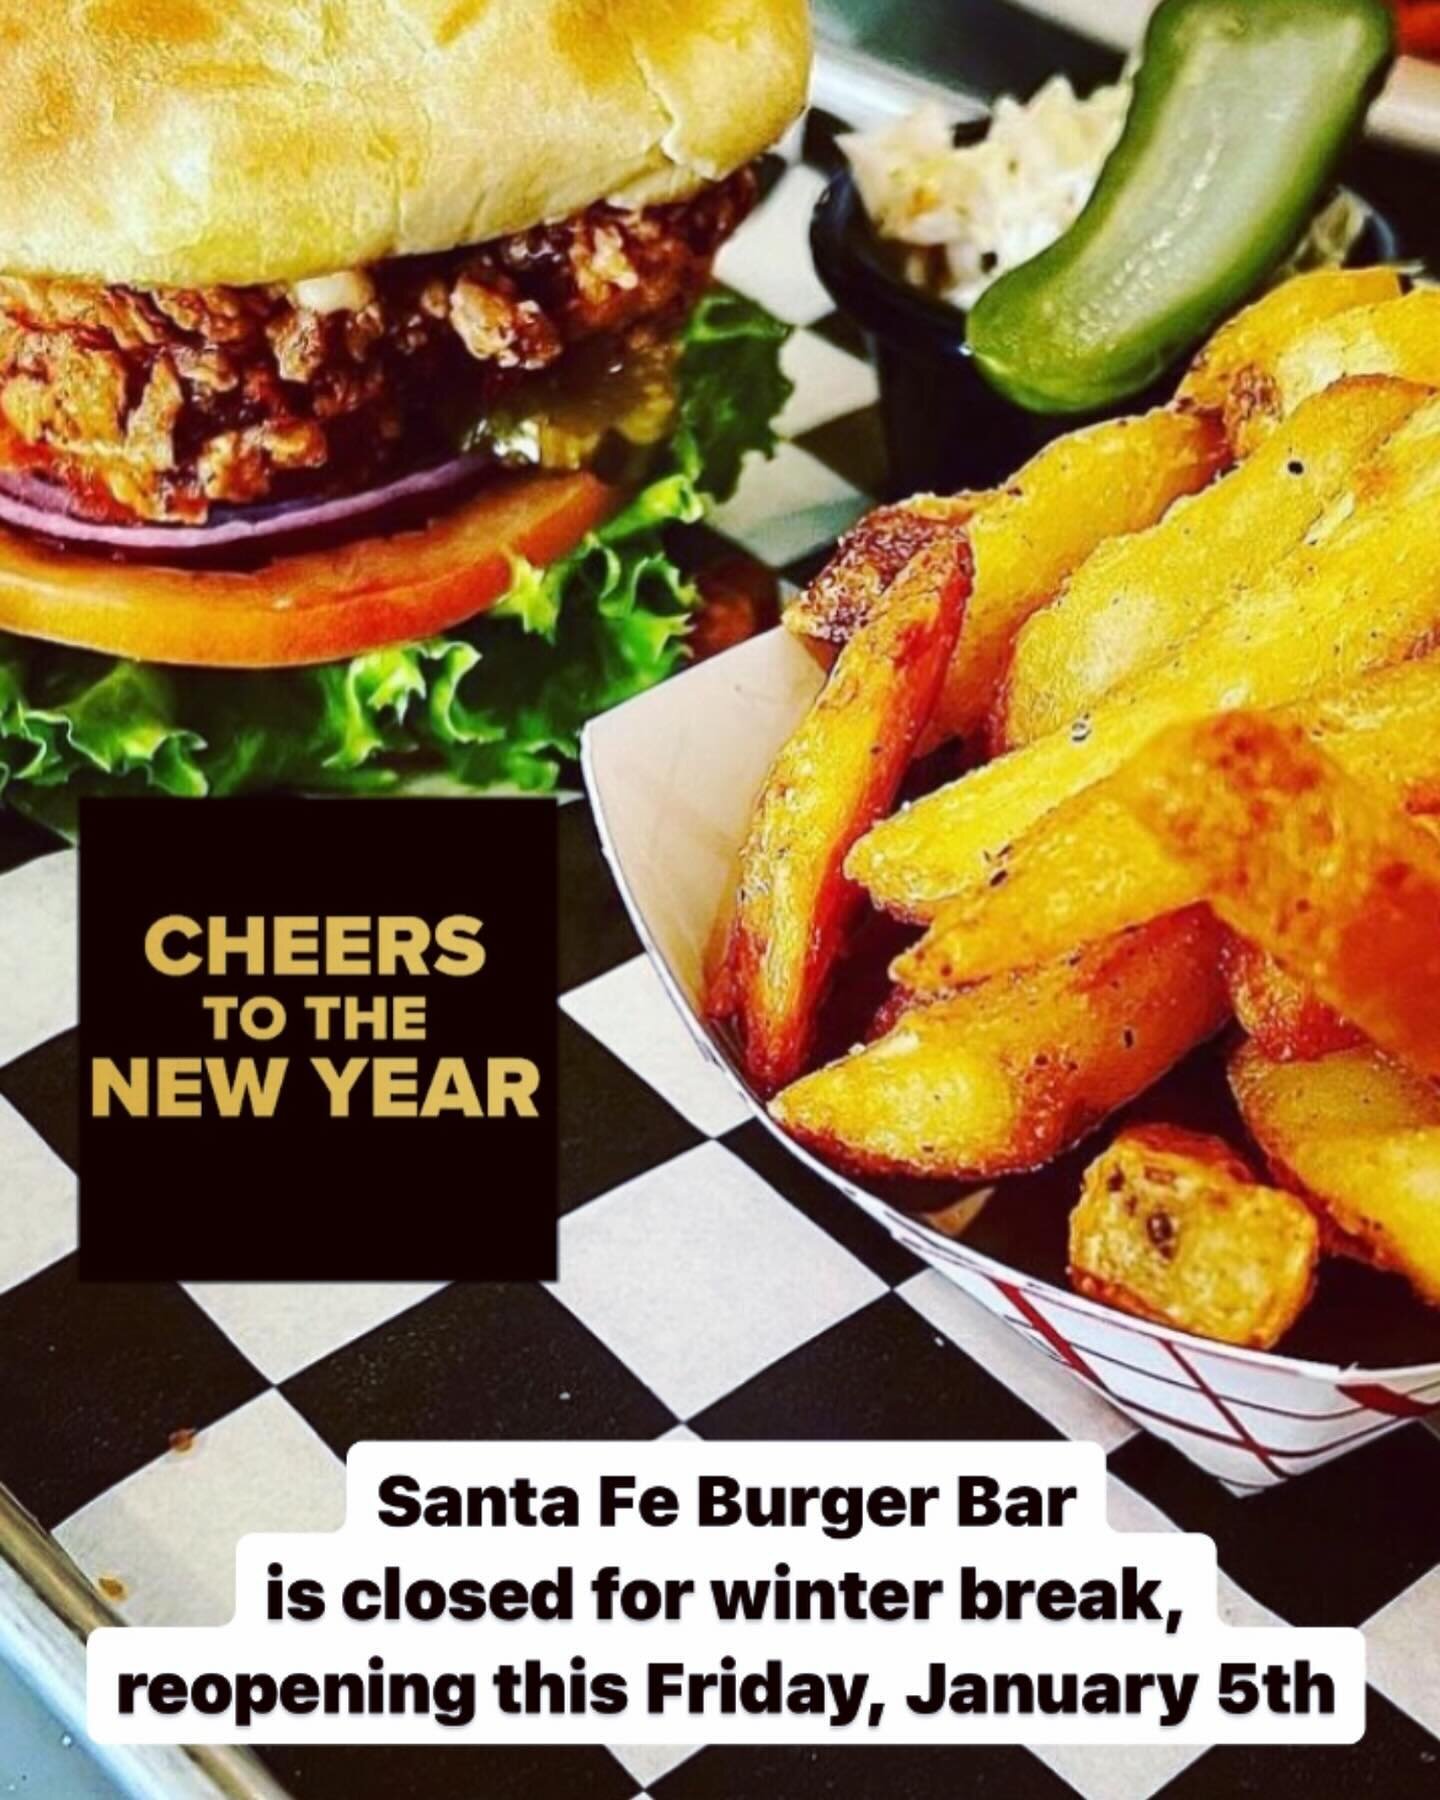 Wishing everyone a healthy and happy year ahead! 

And please accept a huge thanks from Santa Fe staff &amp; family for making 2023 such a spectacular year! Thank you!

Our restaurants are closed for a short break and reset; reopening this Friday, Ja